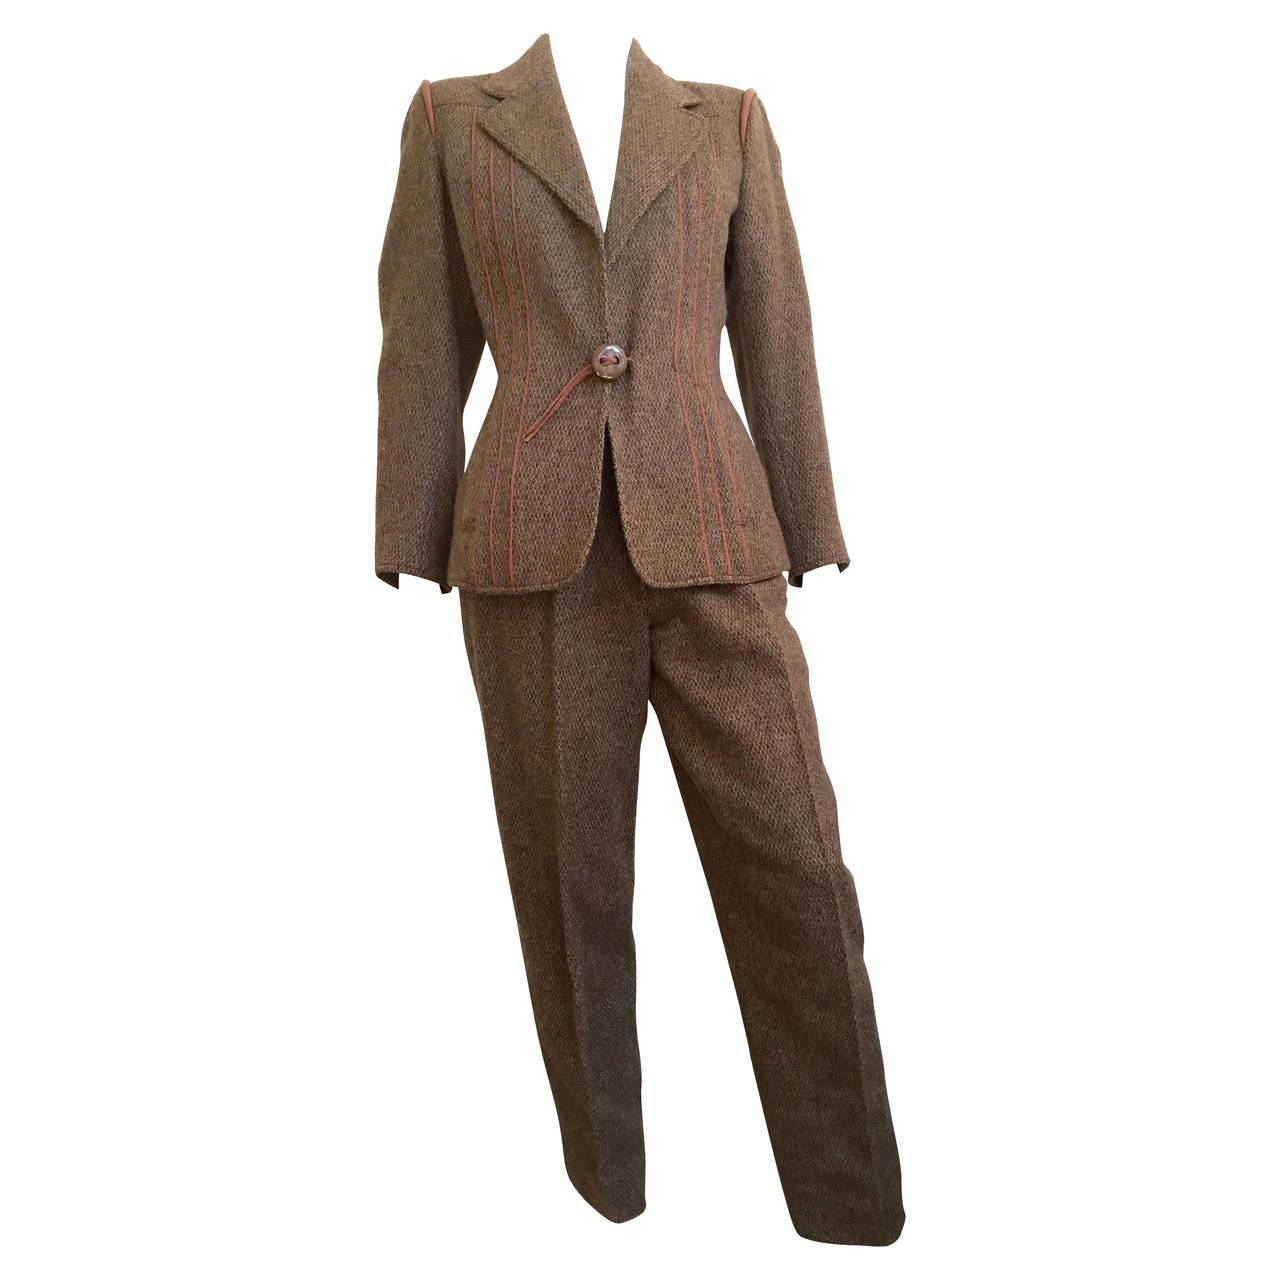 Fendi by Karl Lagerfeld 80s Suit Size 6. For Sale